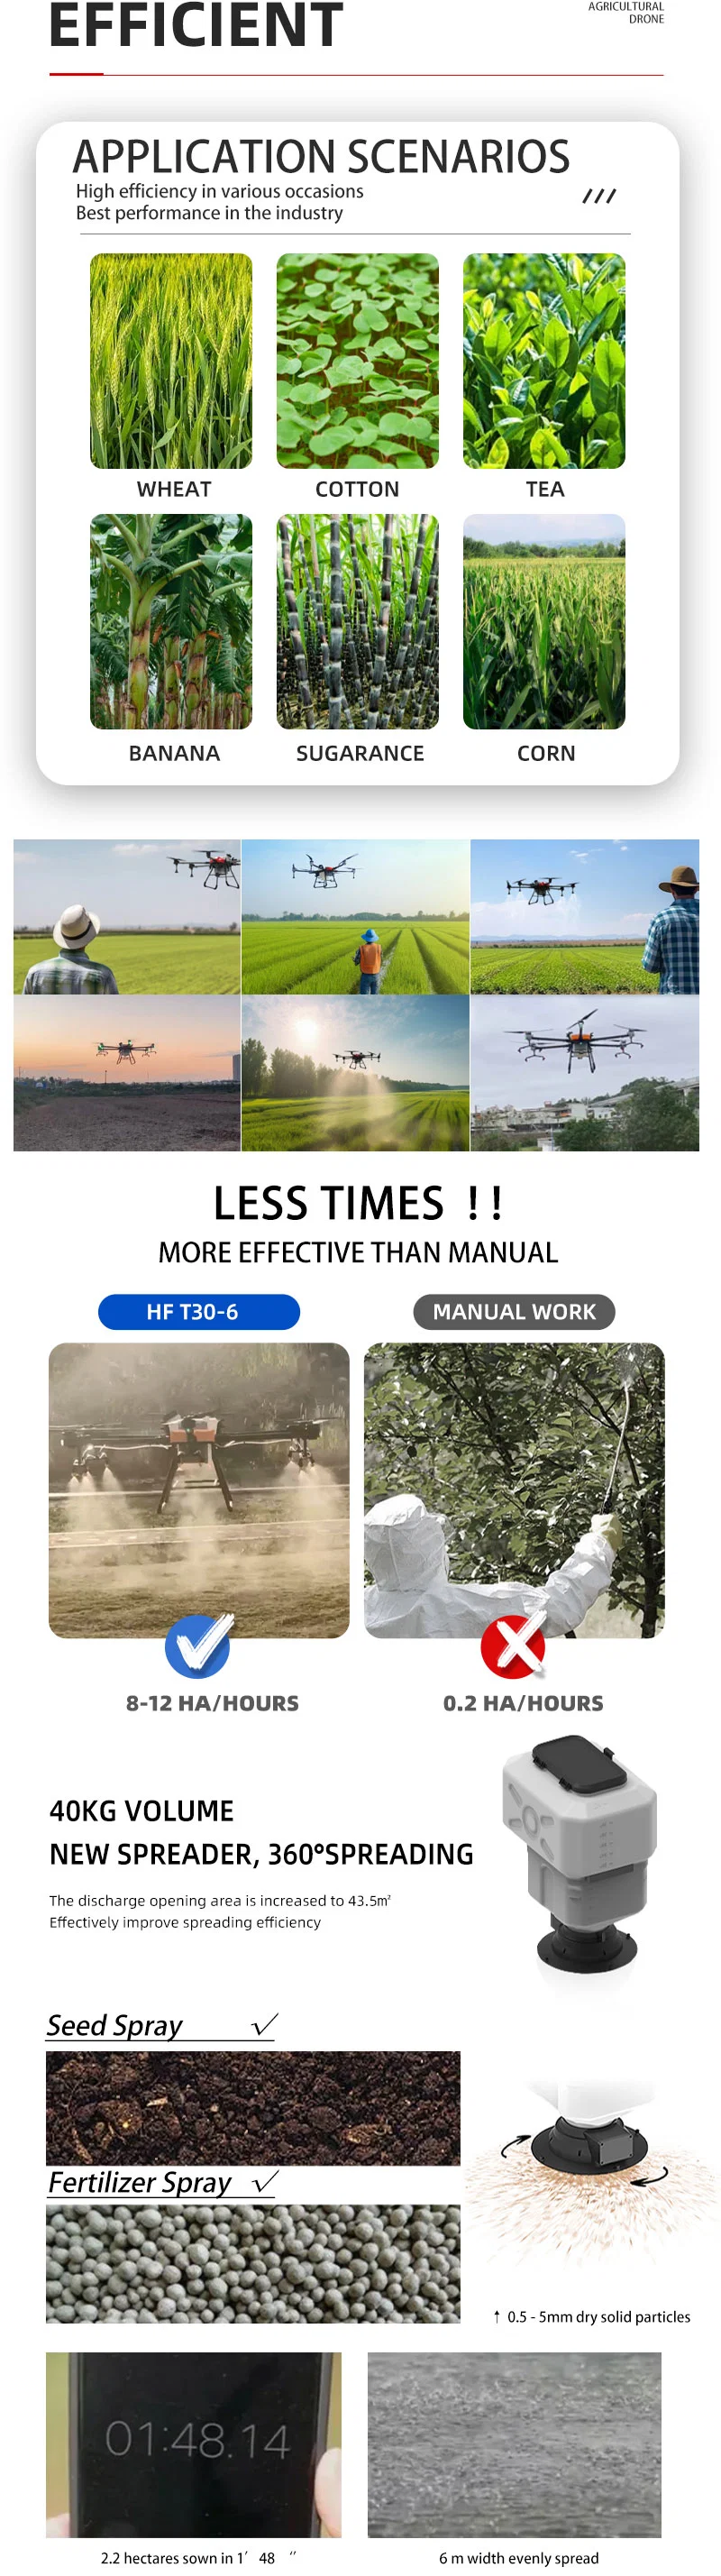 30 L Payload Pesticide Spray Drones Agriculture Use Farm Spray Chemical Herbicide Spraying Agricultural Fumigation Pest Control Drone